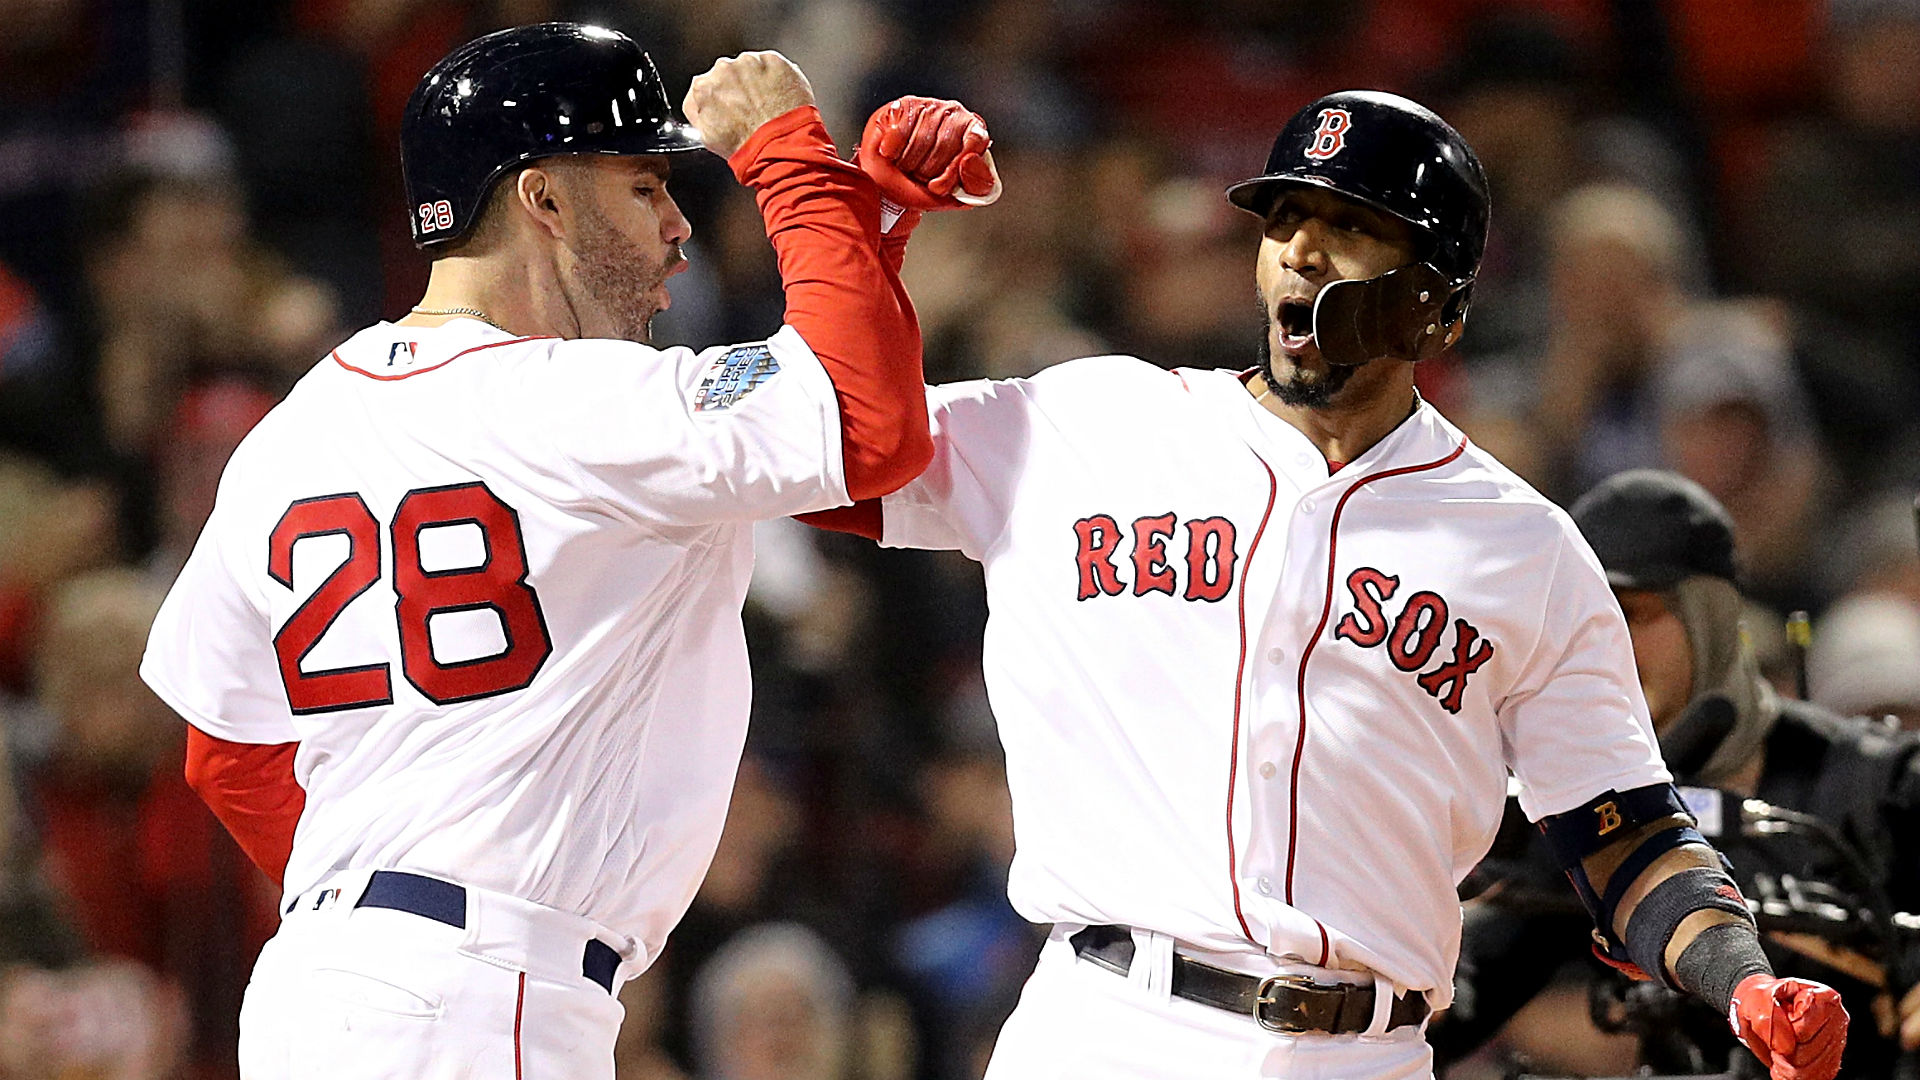 Dodgers vs. Red Sox results Boston exhibits resilience, takes World